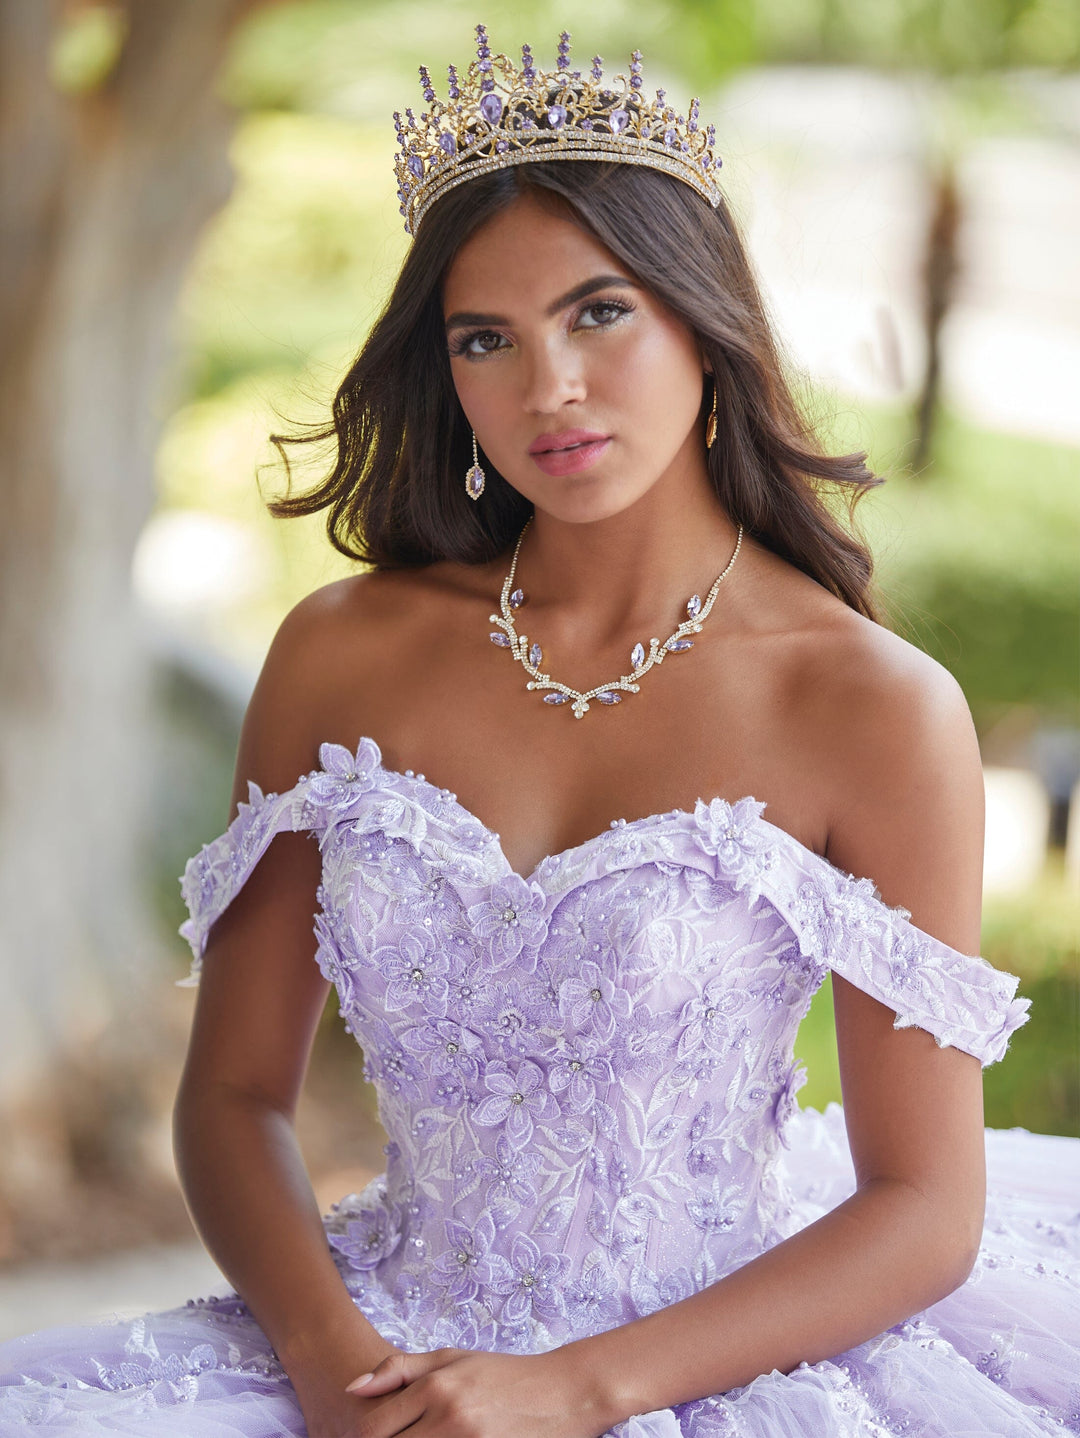 Applique Off Shoulder Quinceanera Dress by House of Wu 26049